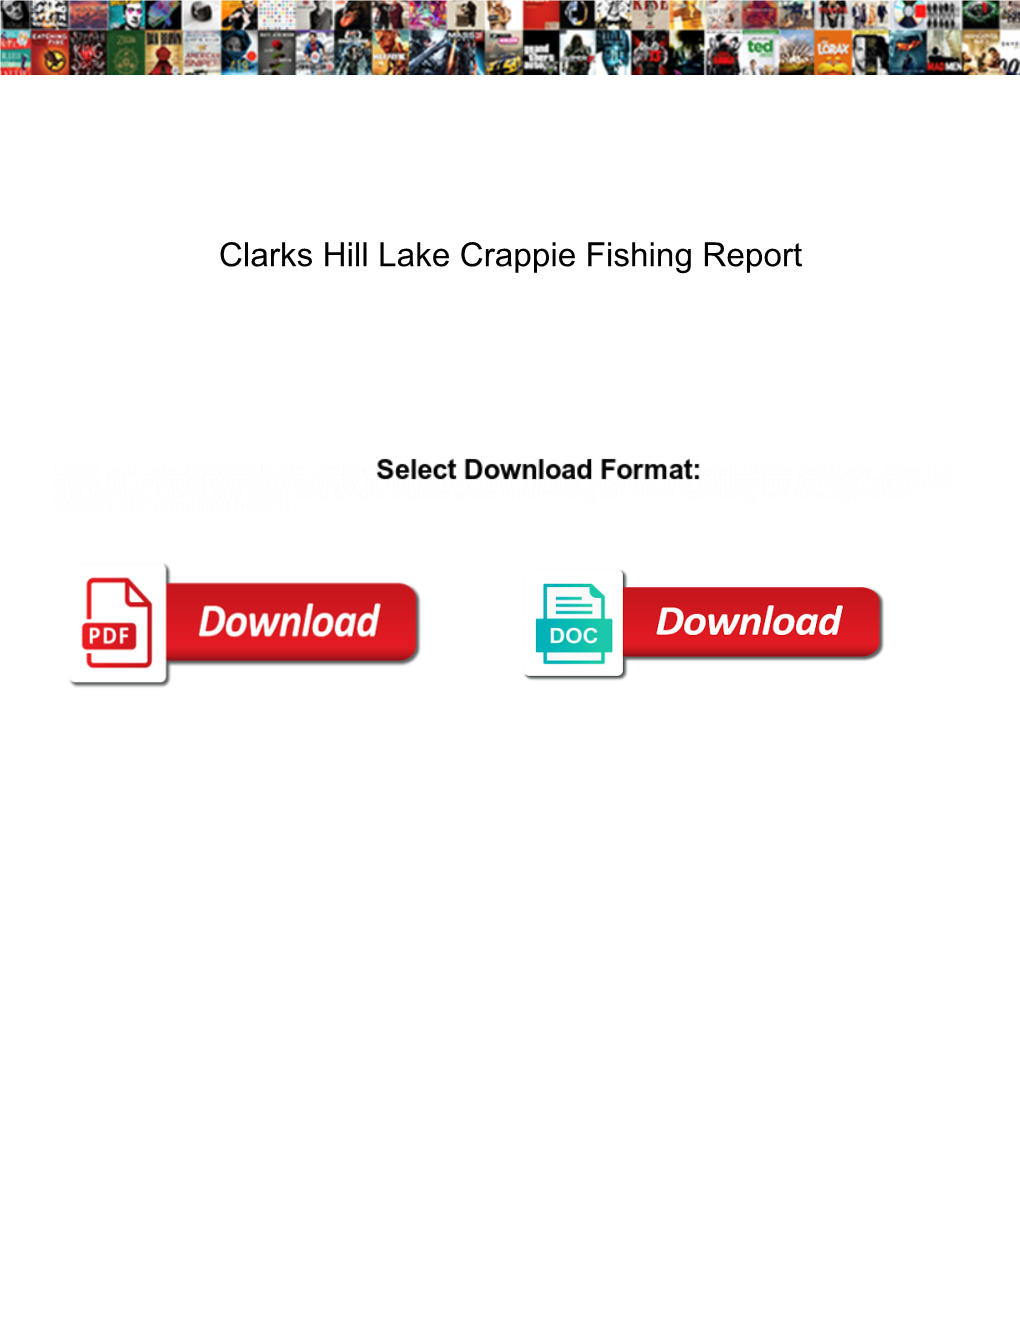 Clarks Hill Lake Crappie Fishing Report